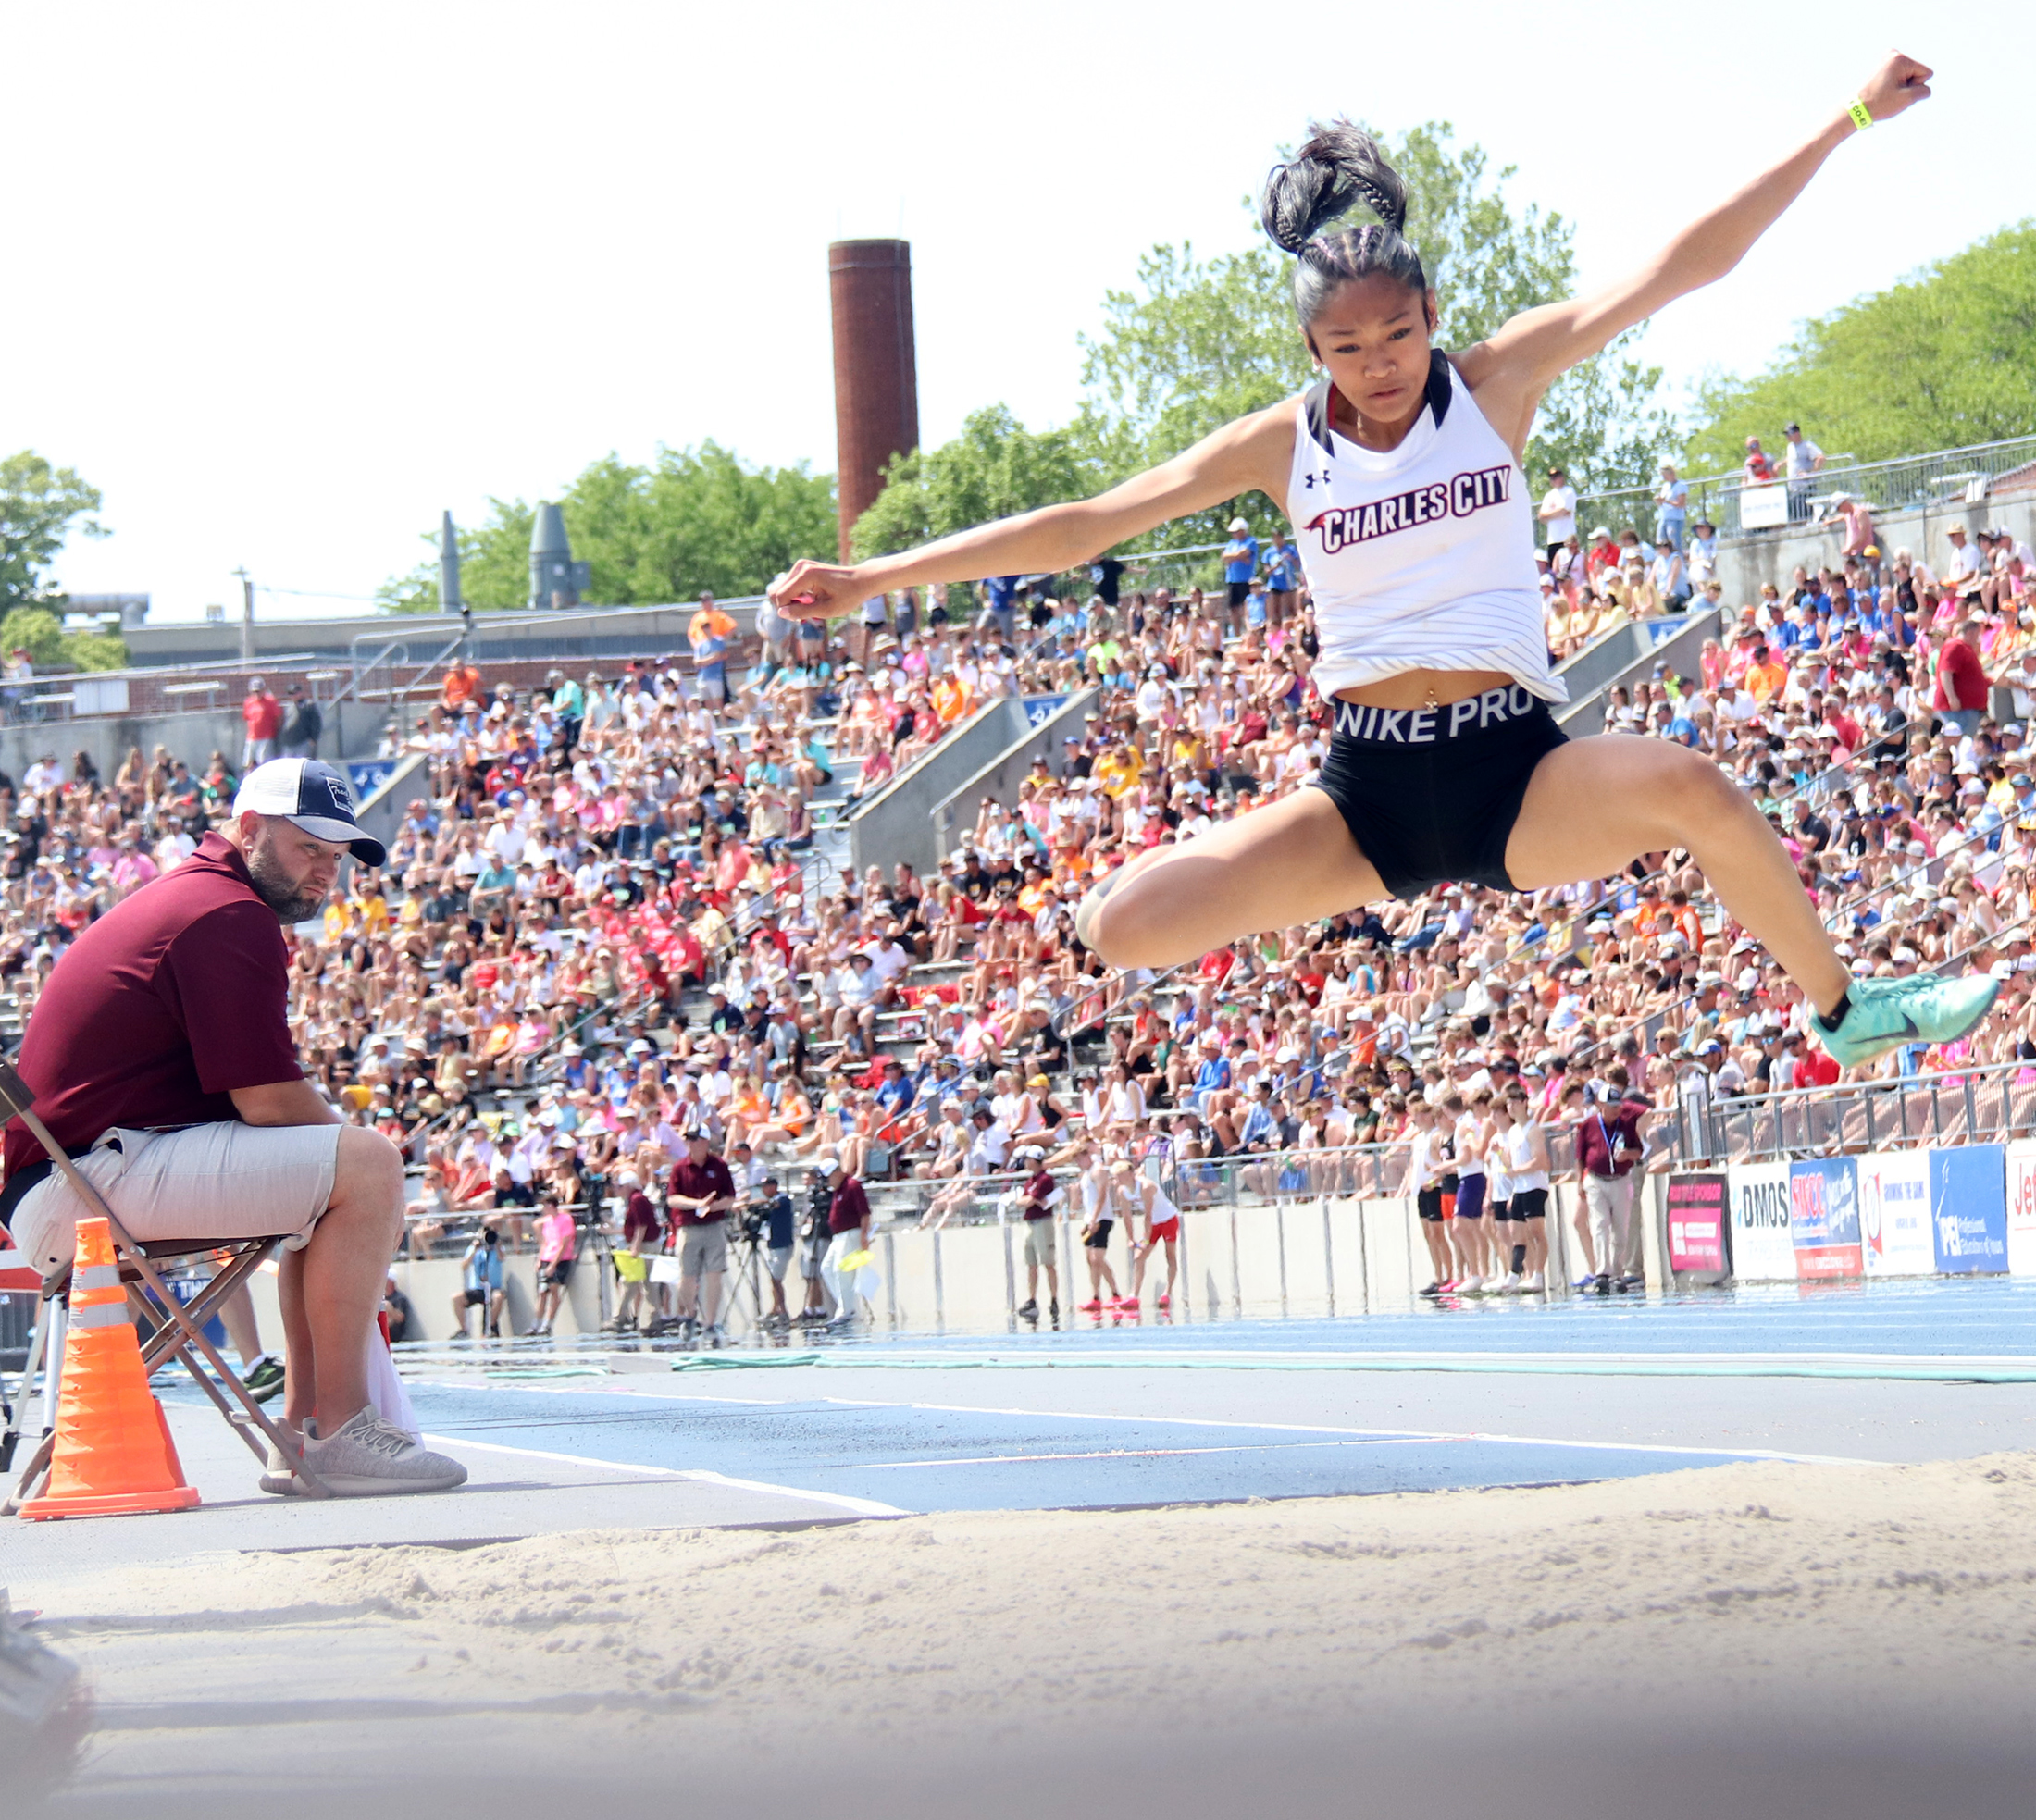 Wing-footed Comets soar to the medal stand at State T&F Championships